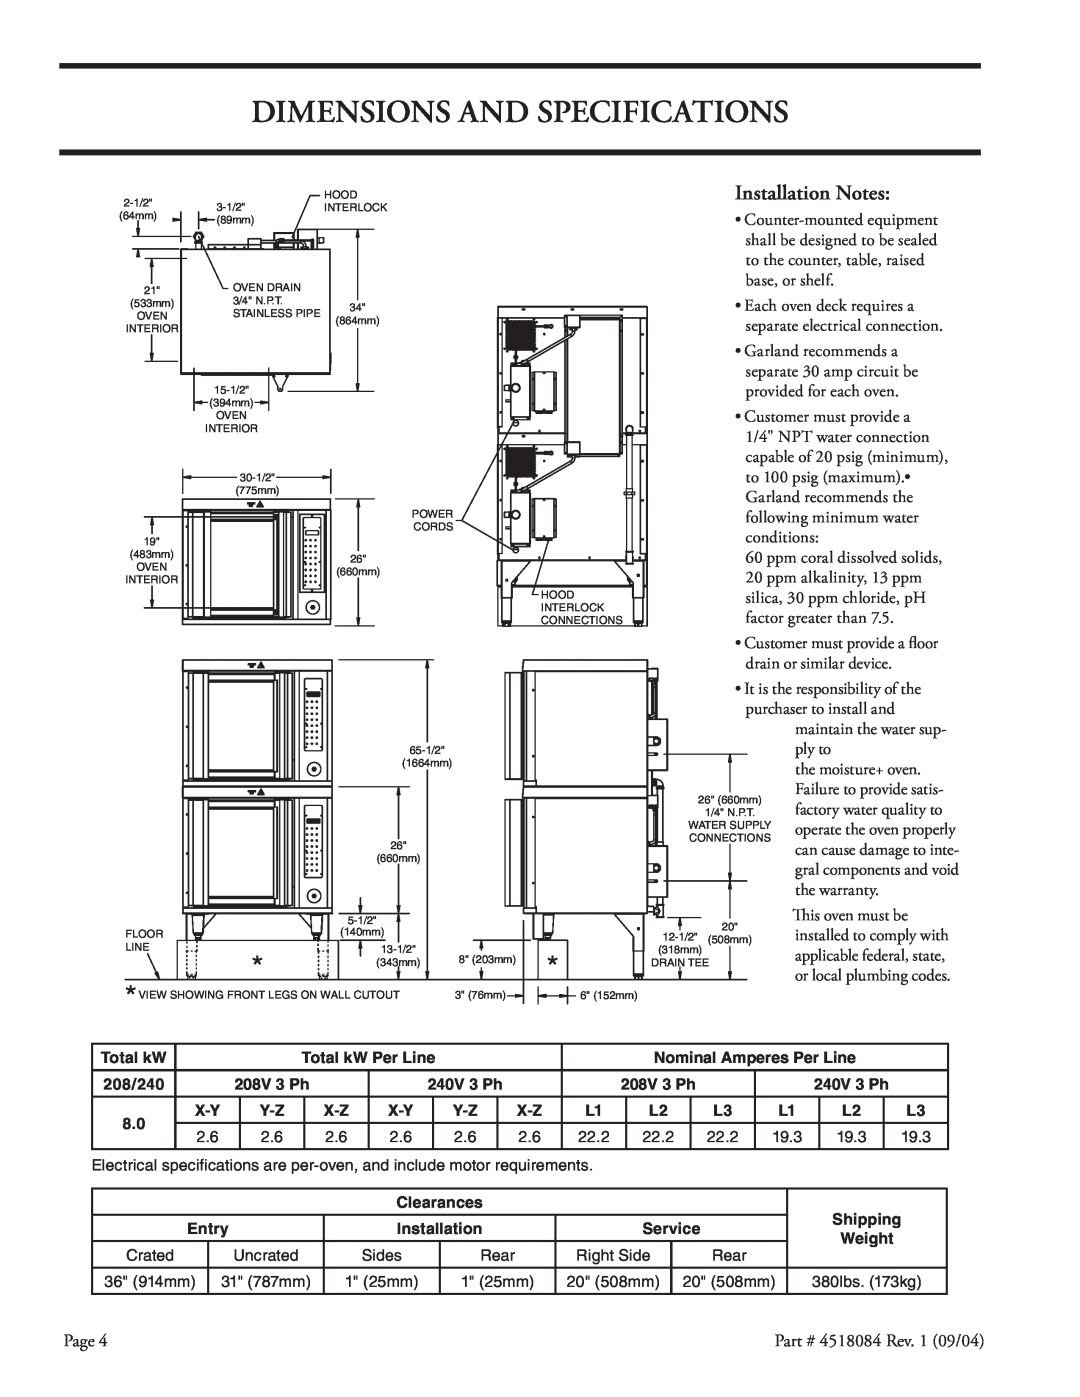 Garland MPOE5L operating instructions Dimensions And Specifications, Installation Notes 